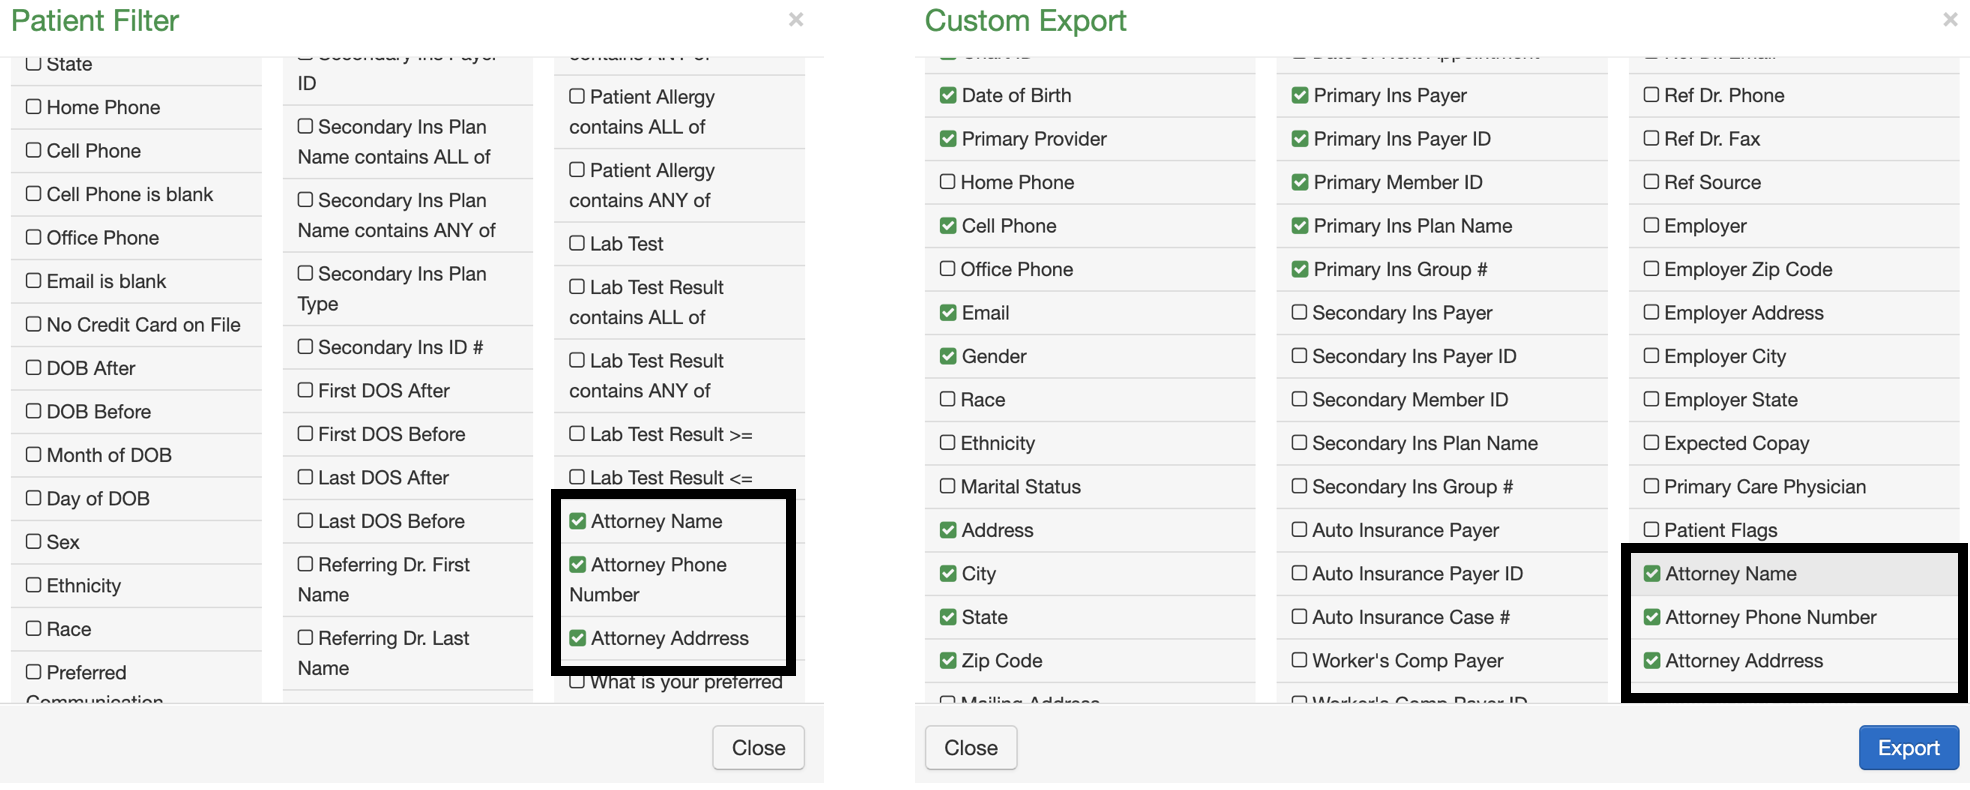 Advanced_Report_Custom_Export_and_Patient_Filters_Attorney_Info_Side_By_Side.png